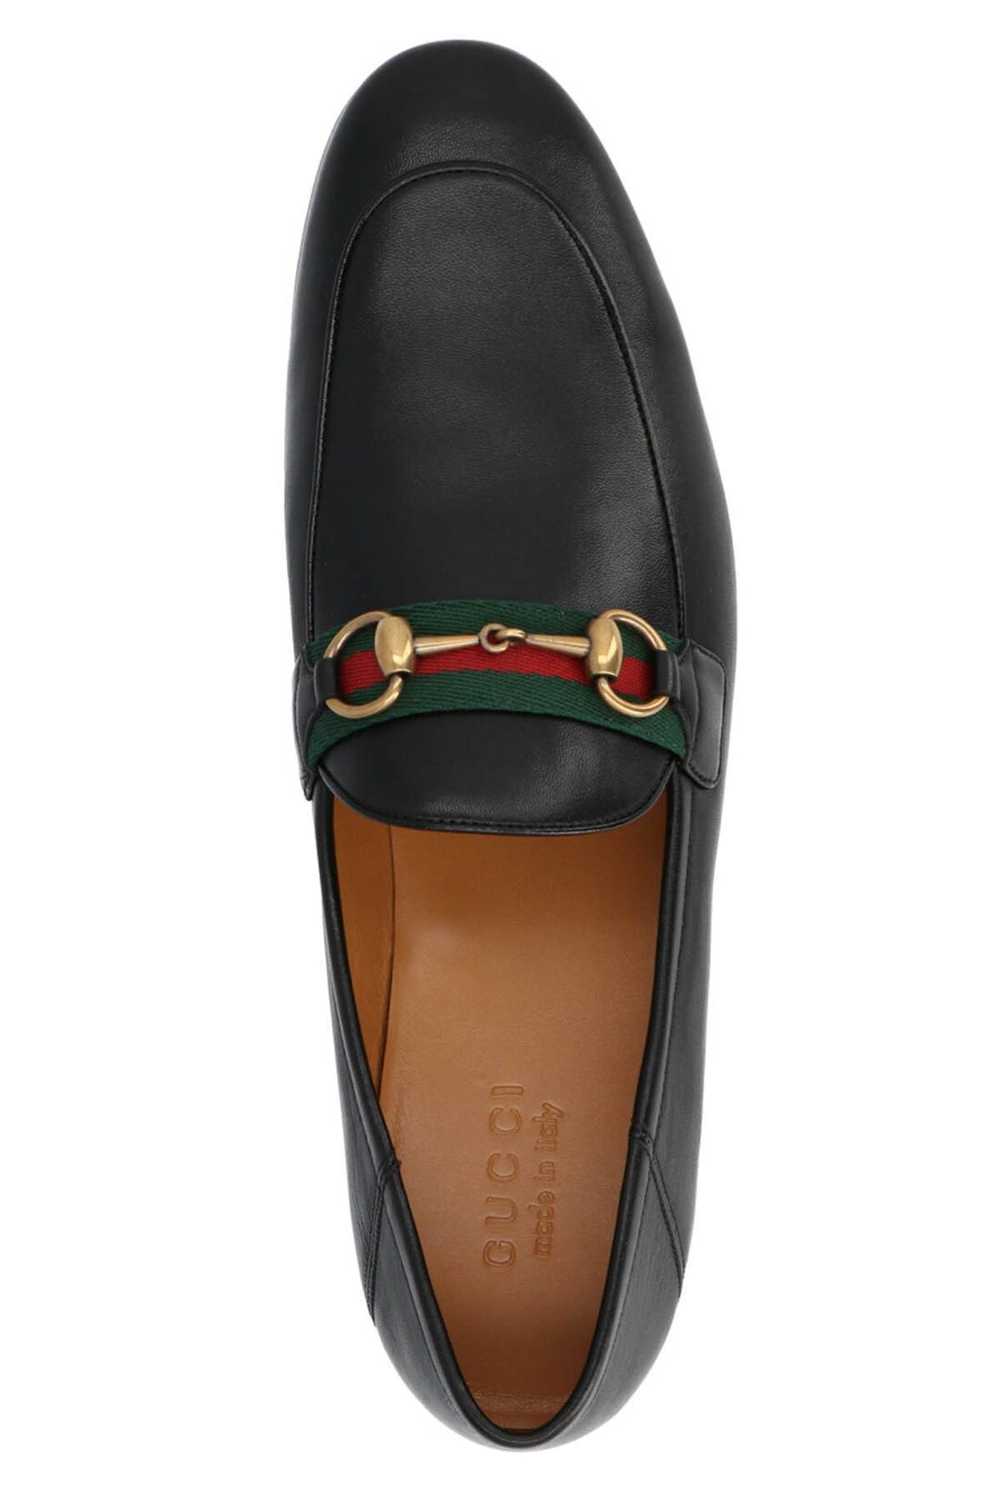 Gucci 'Brixton' loafers - image 2